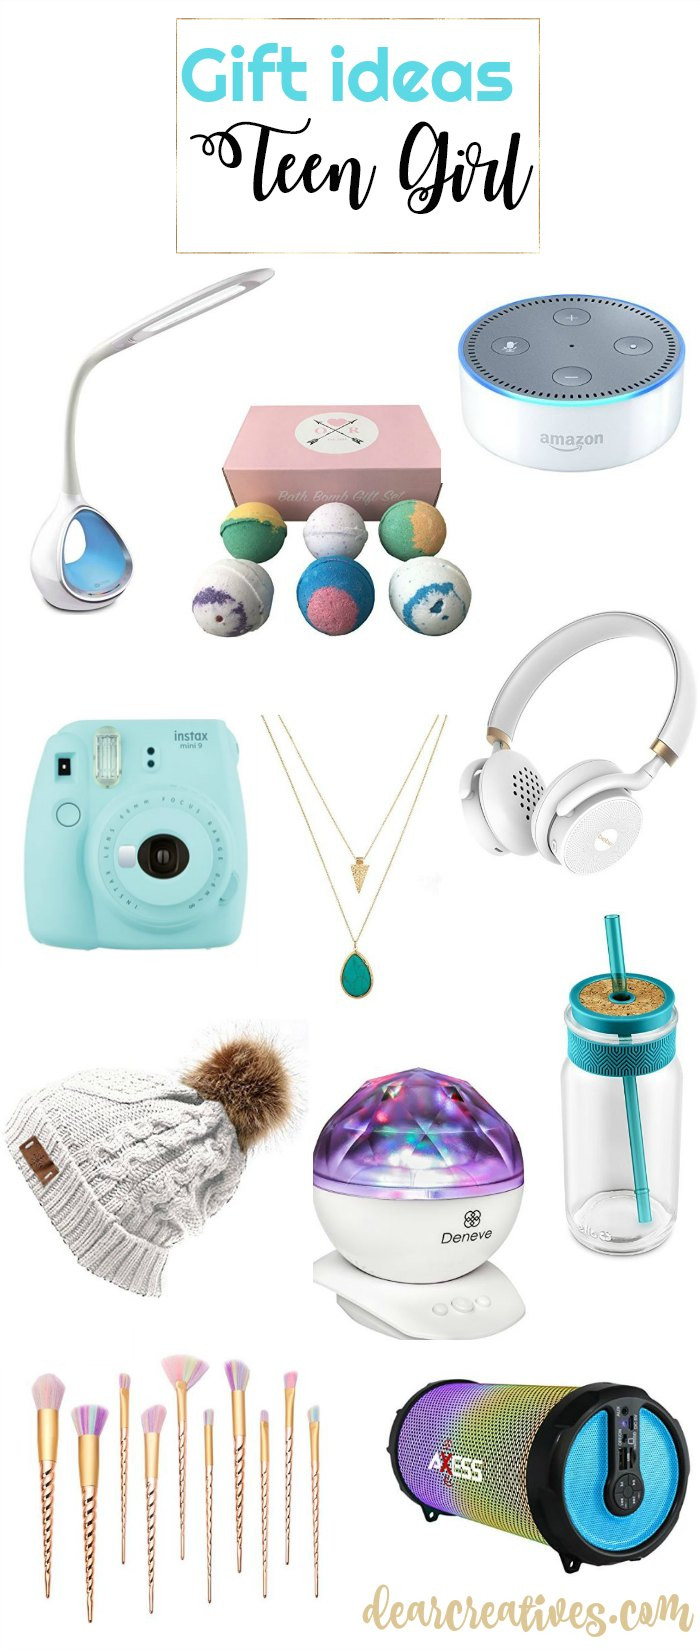 Cool Gift Ideas For Teen Girls
 Gift Ideas for Teen Girls This Gift Guide Packed Full of